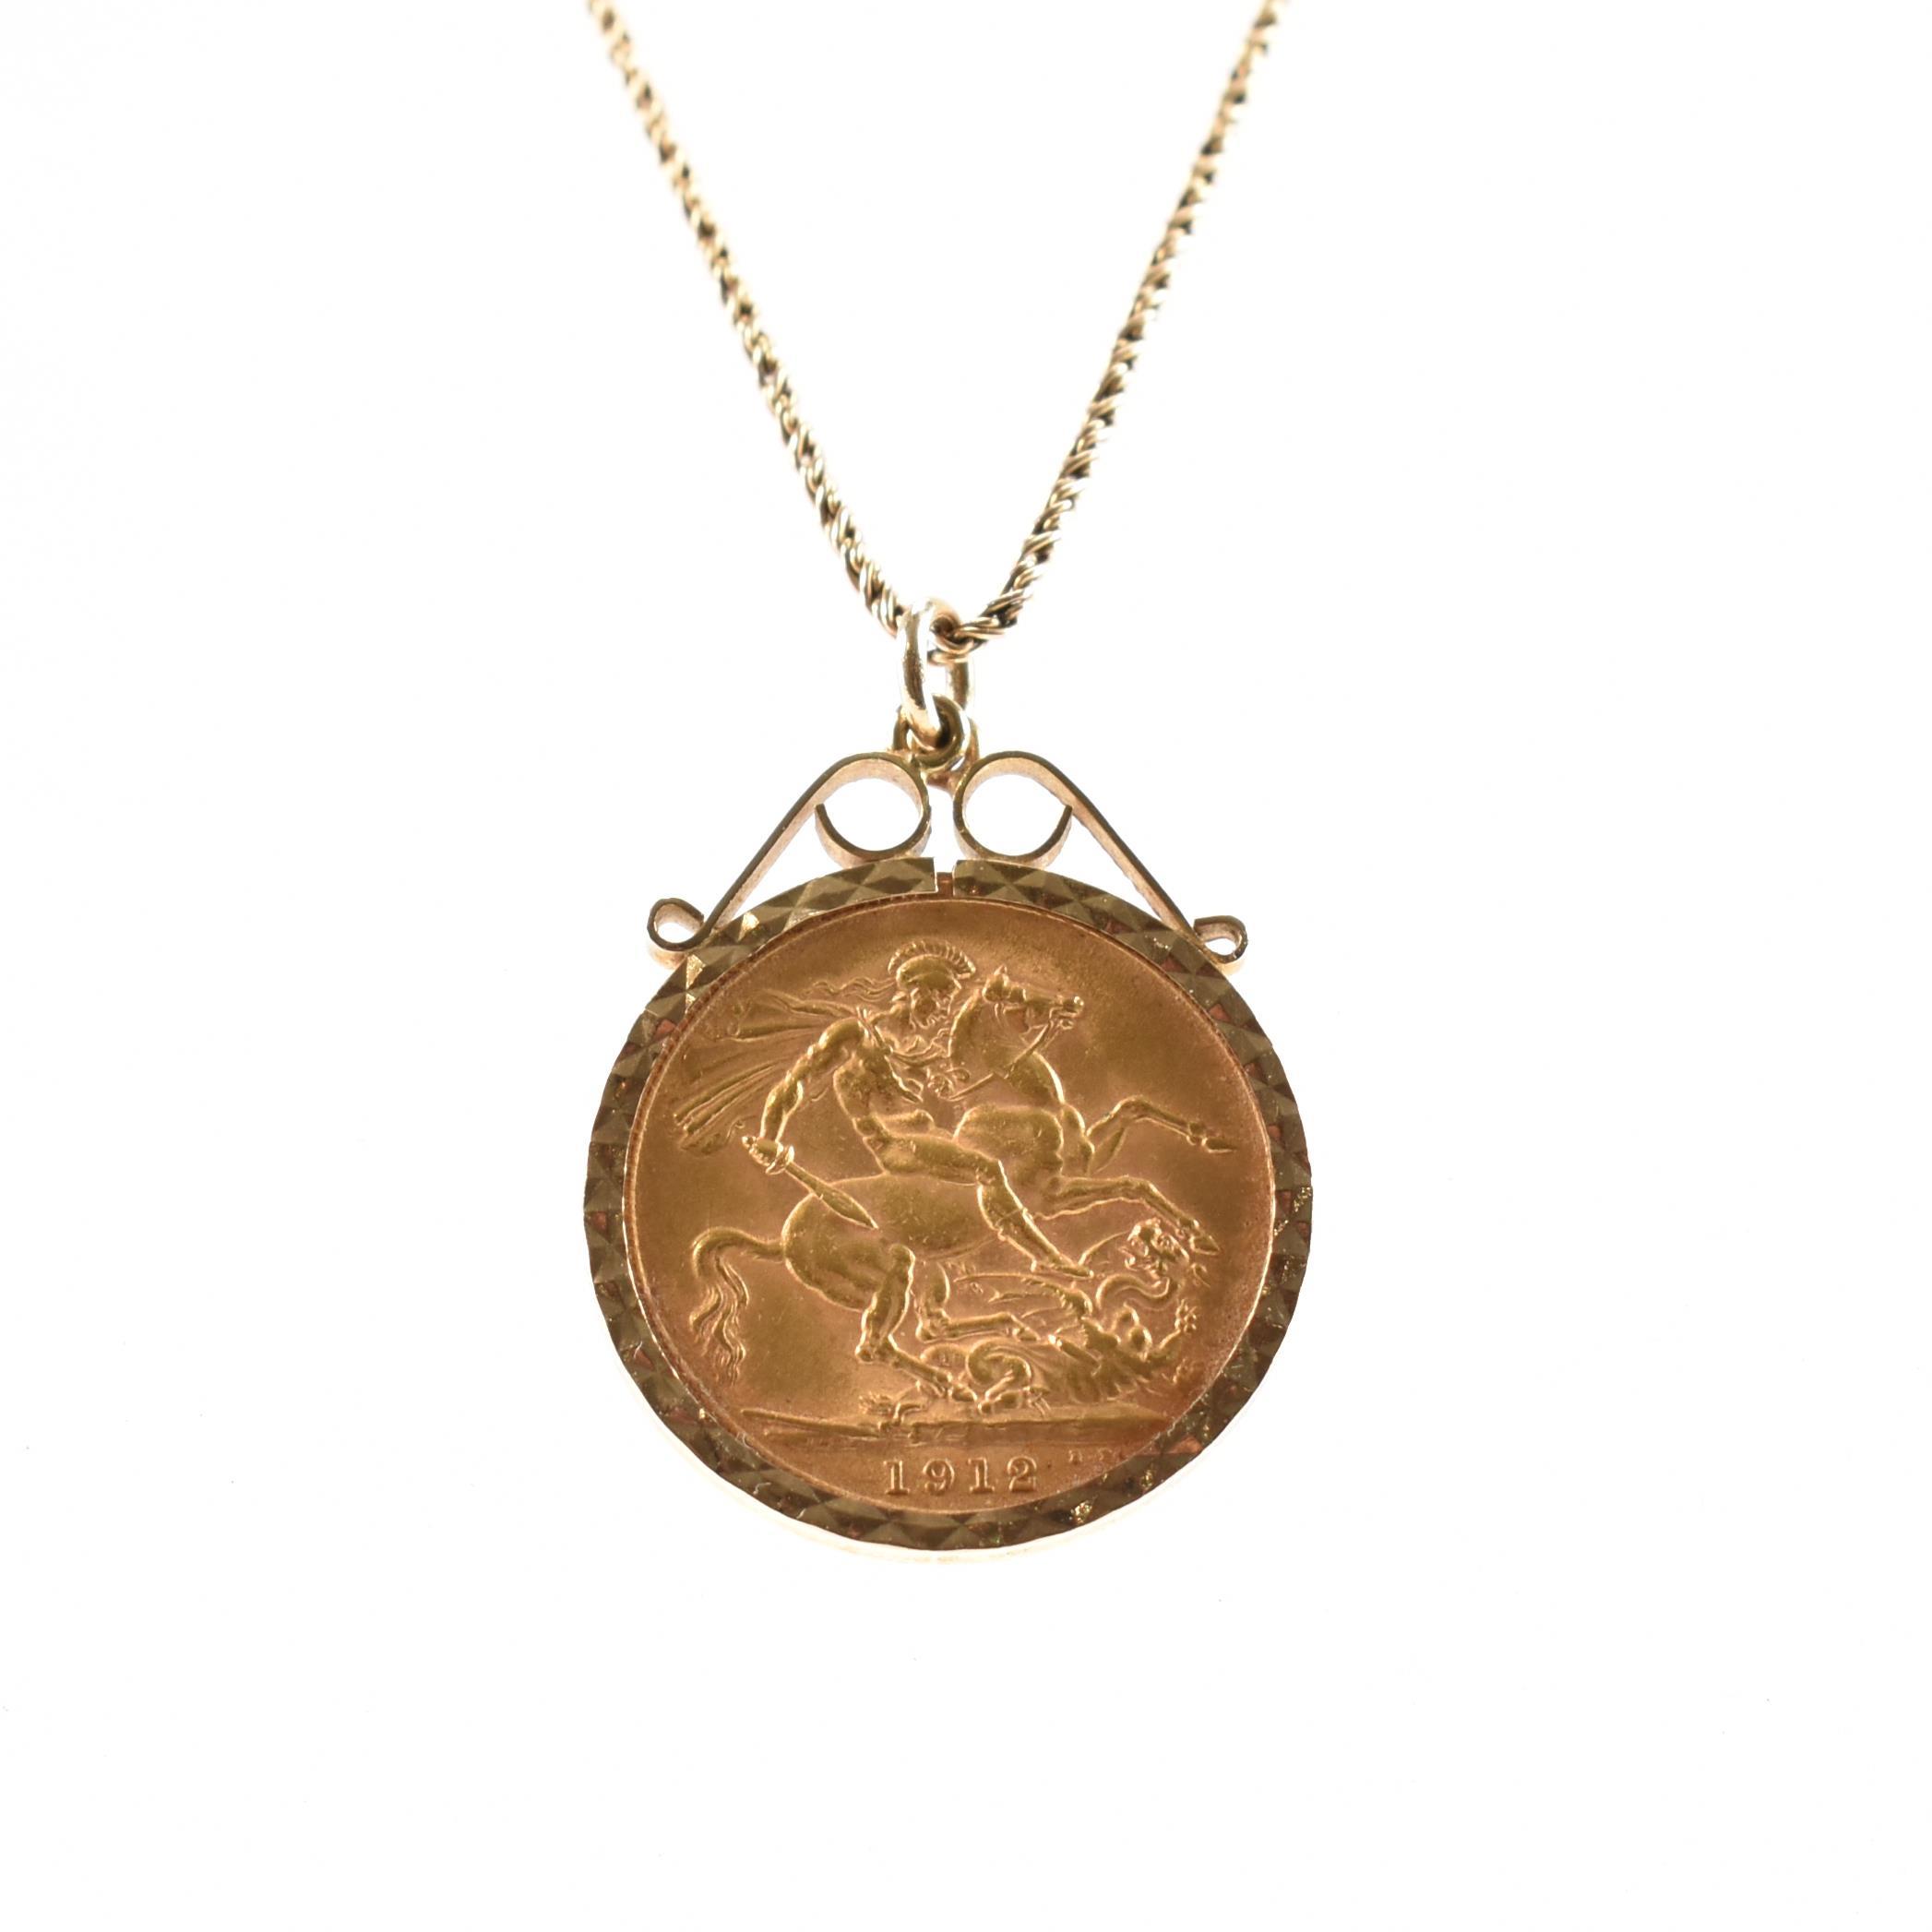 1912 SOVEREIGN COIN IN HALLMARKED 9CT GOLD MOUNT & CHAIN - Image 2 of 4